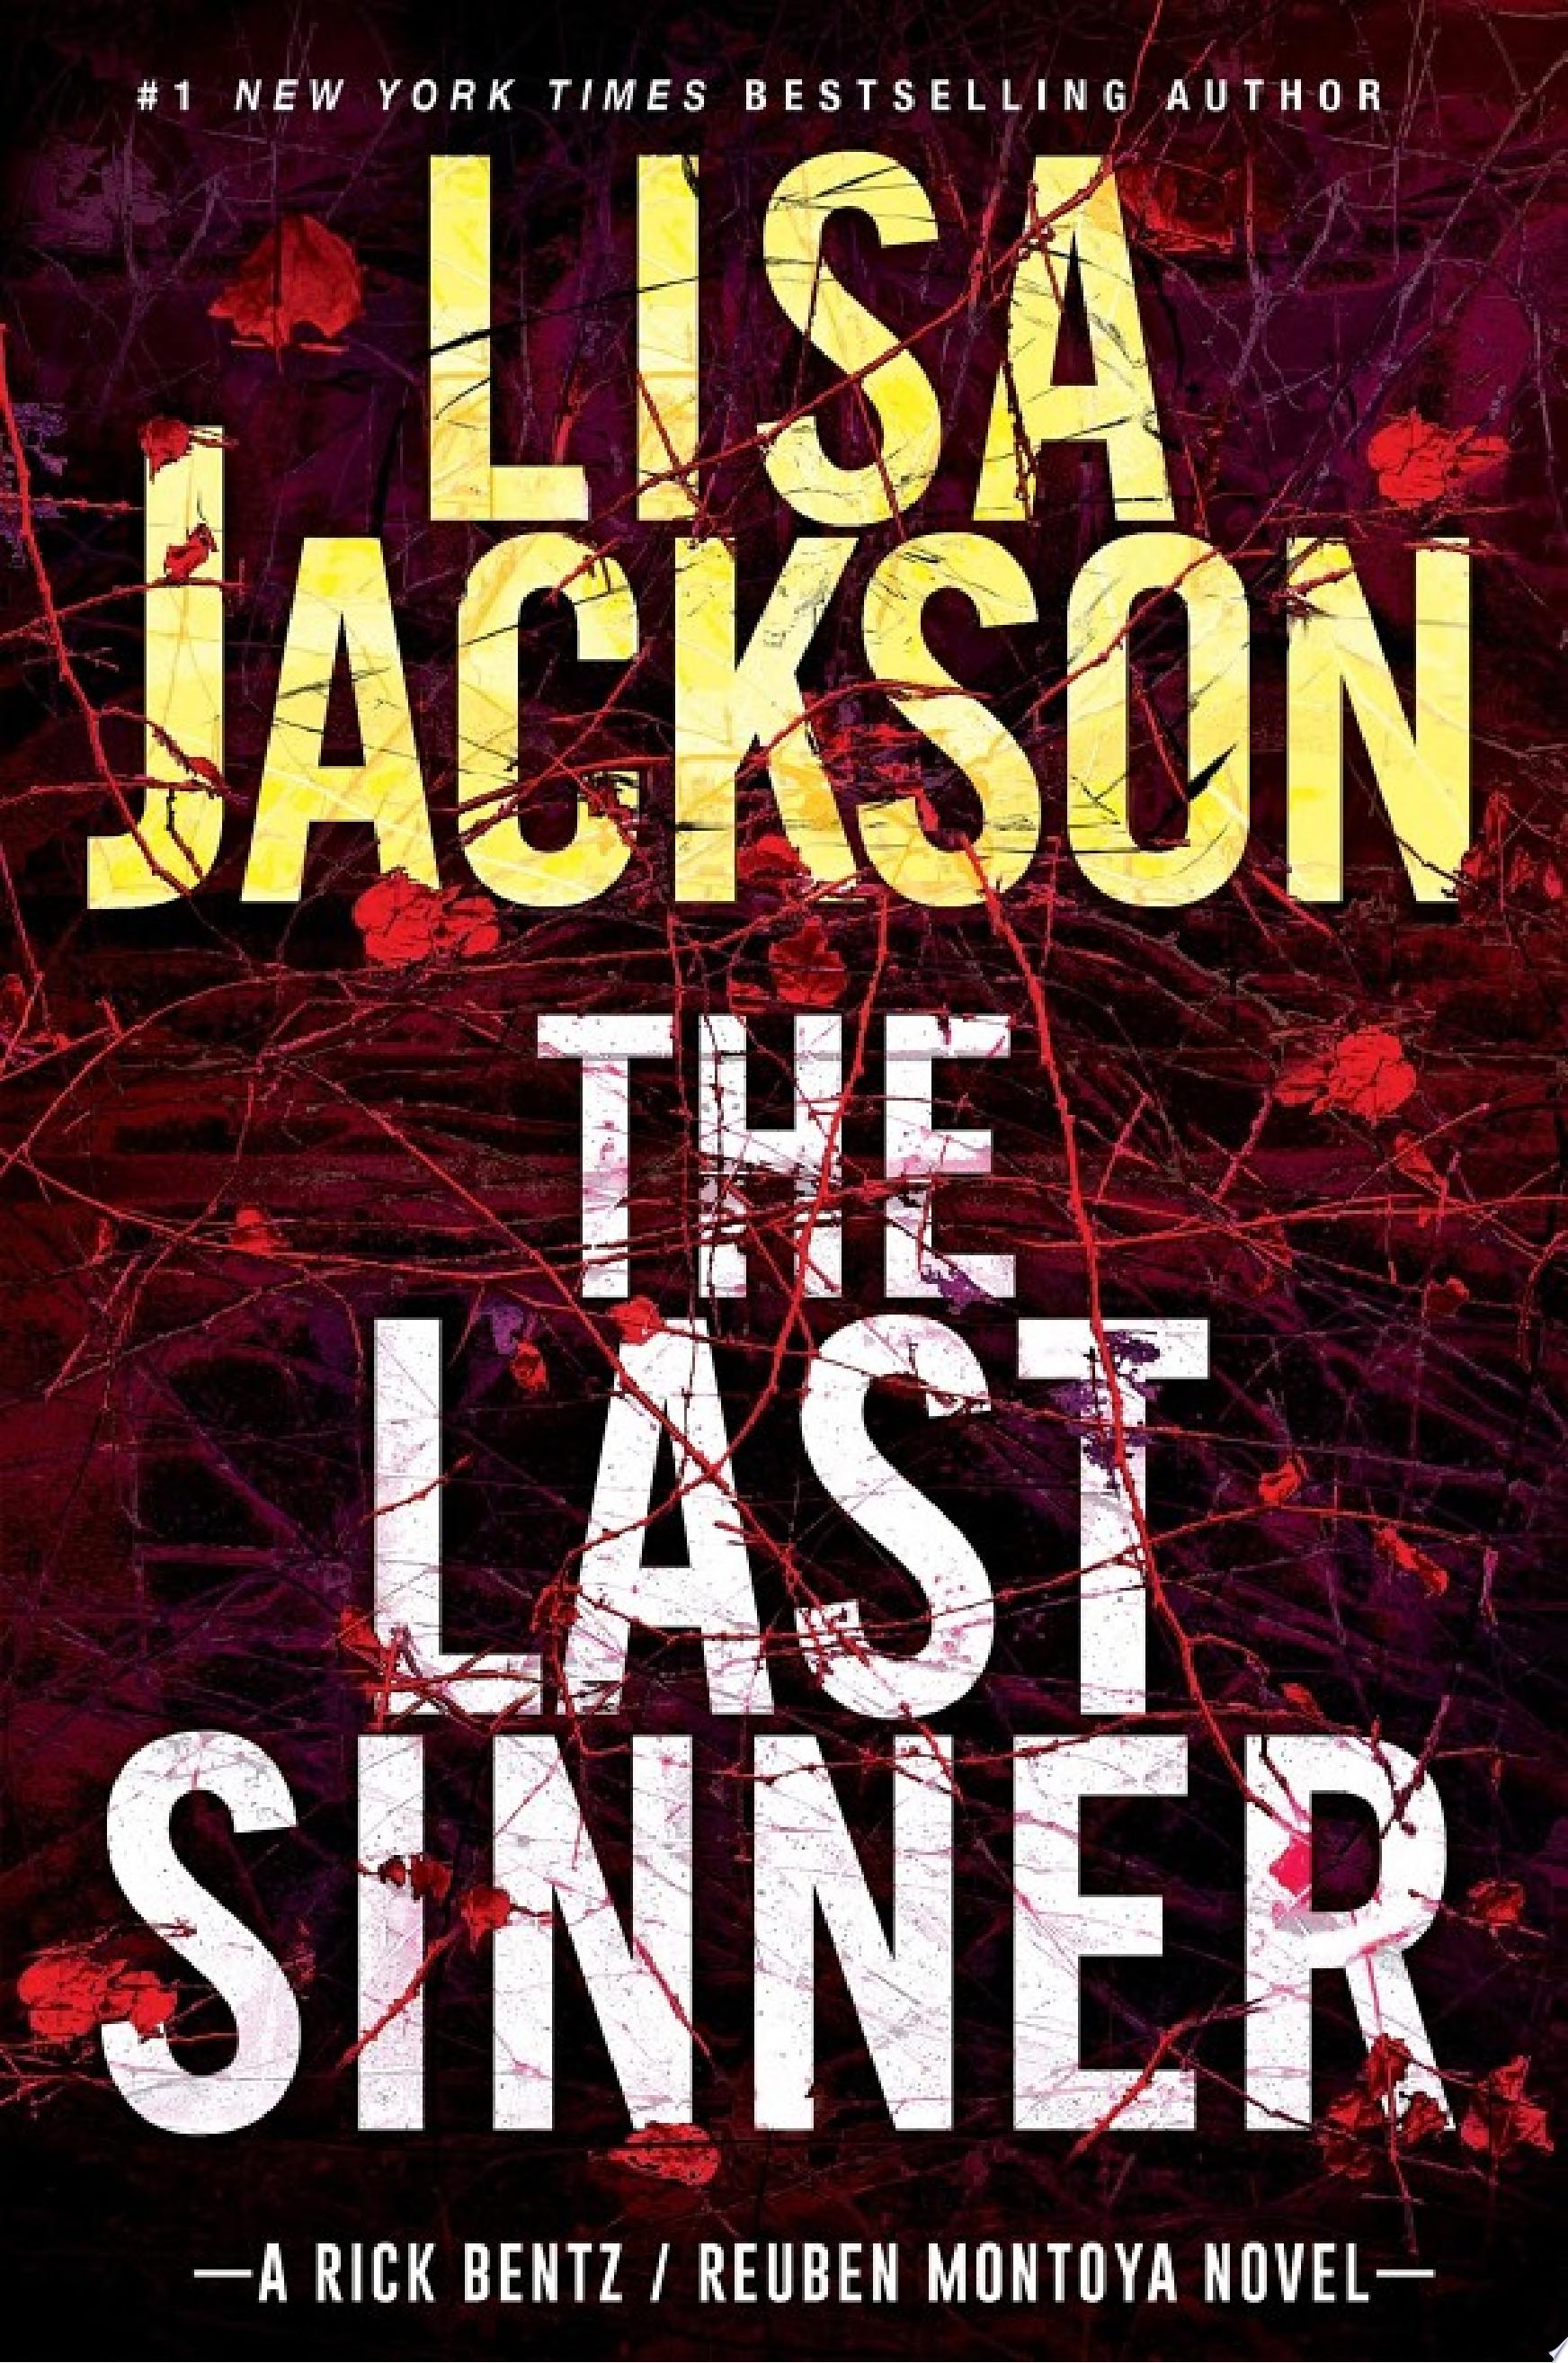 Image for "The Last Sinner"